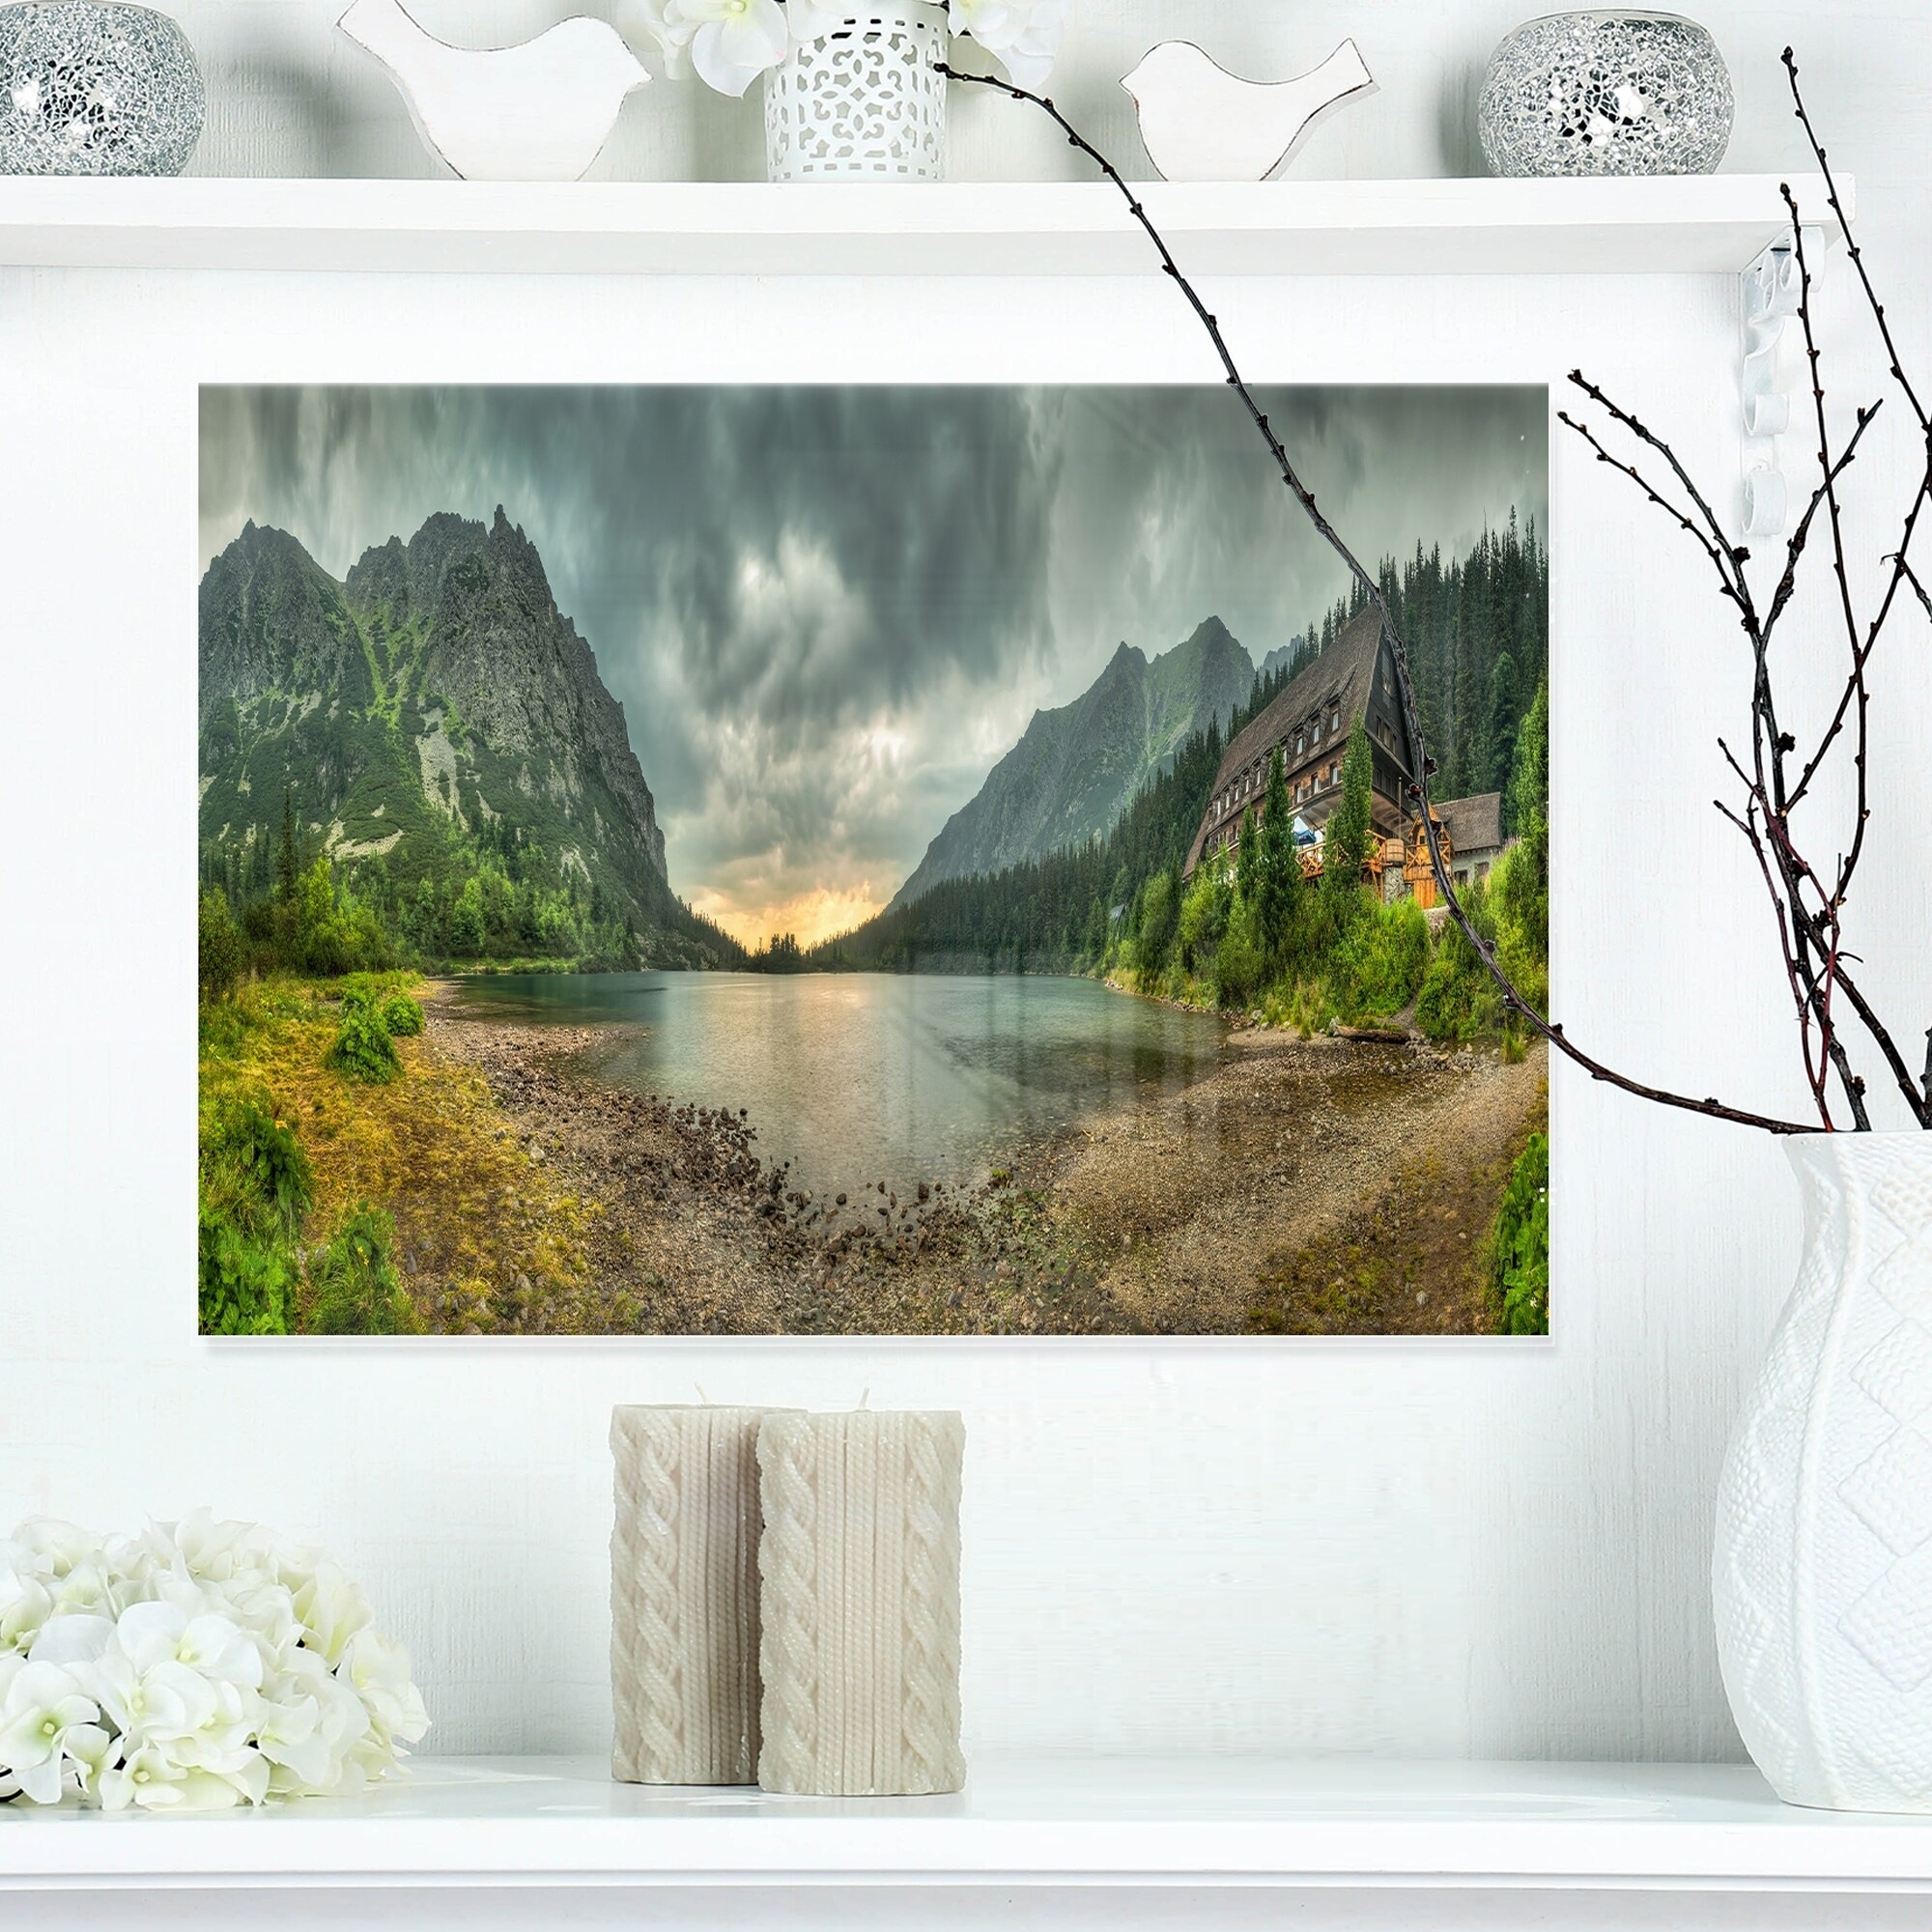 https://ak1.ostkcdn.com/images/products/12779380/Mountain-Chalet-at-Sunset-Panorama-Landscape-Glossy-Metal-Wall-Art-b3634058-a01a-4773-9859-841dca678d65.jpg